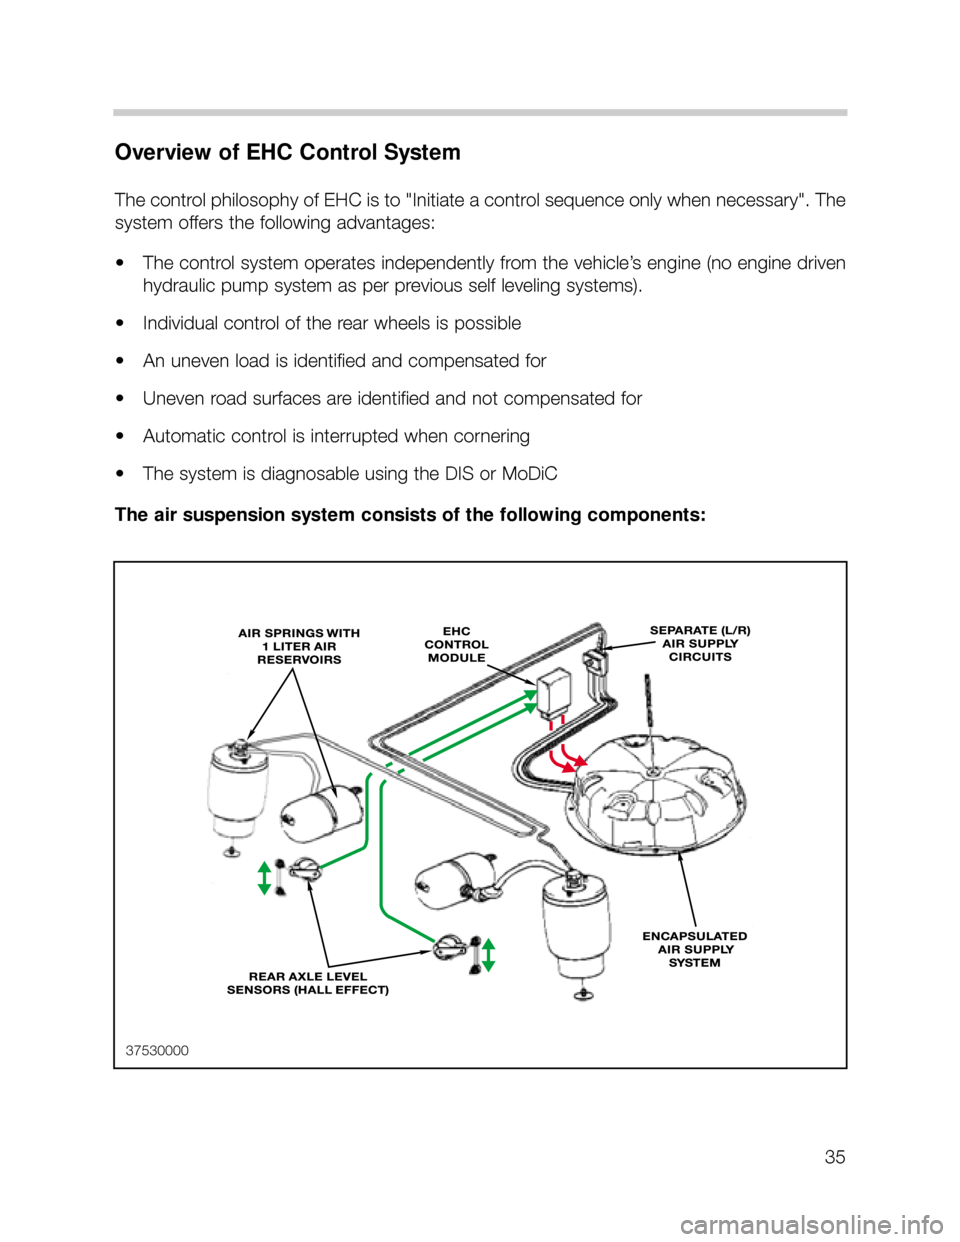 BMW X5 2002 E53 Owners Guide 35
Overview of EHC Control System
The control philosophy of EHC is to "Initiate a control sequence only when necessary". The
system offers the following advantages:
• The control system operates ind